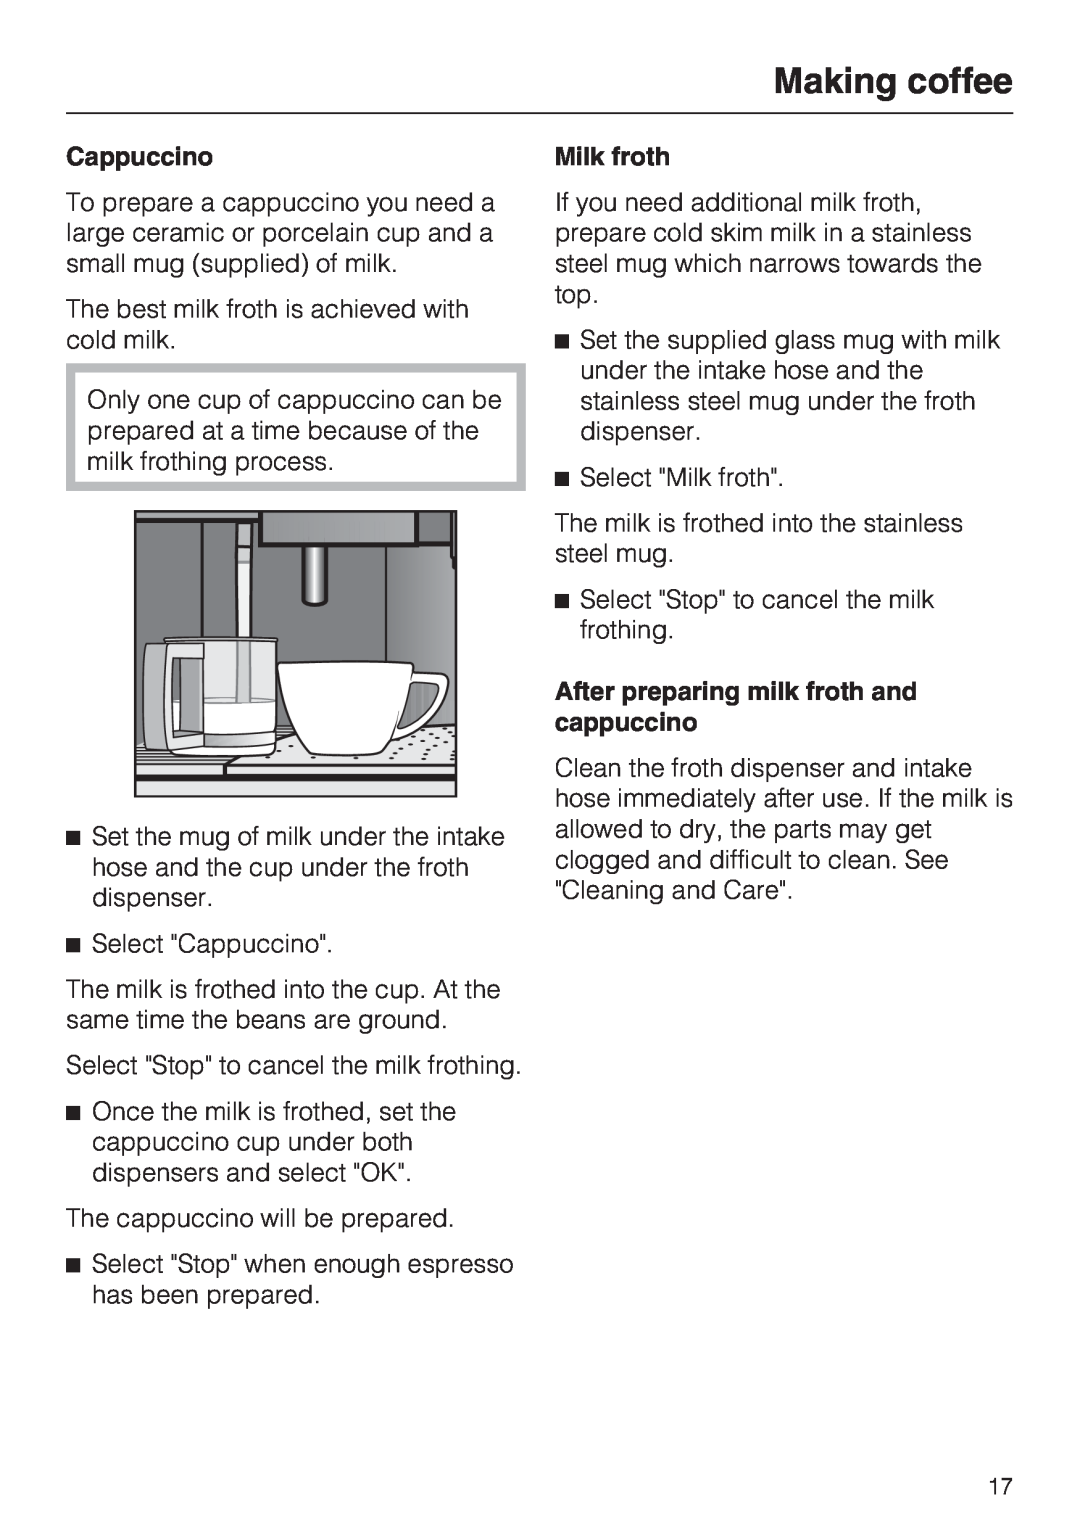 Miele CVA 4070 installation instructions Making coffee, Cappuccino, Milk froth, After preparing milk froth and, cappuccino 